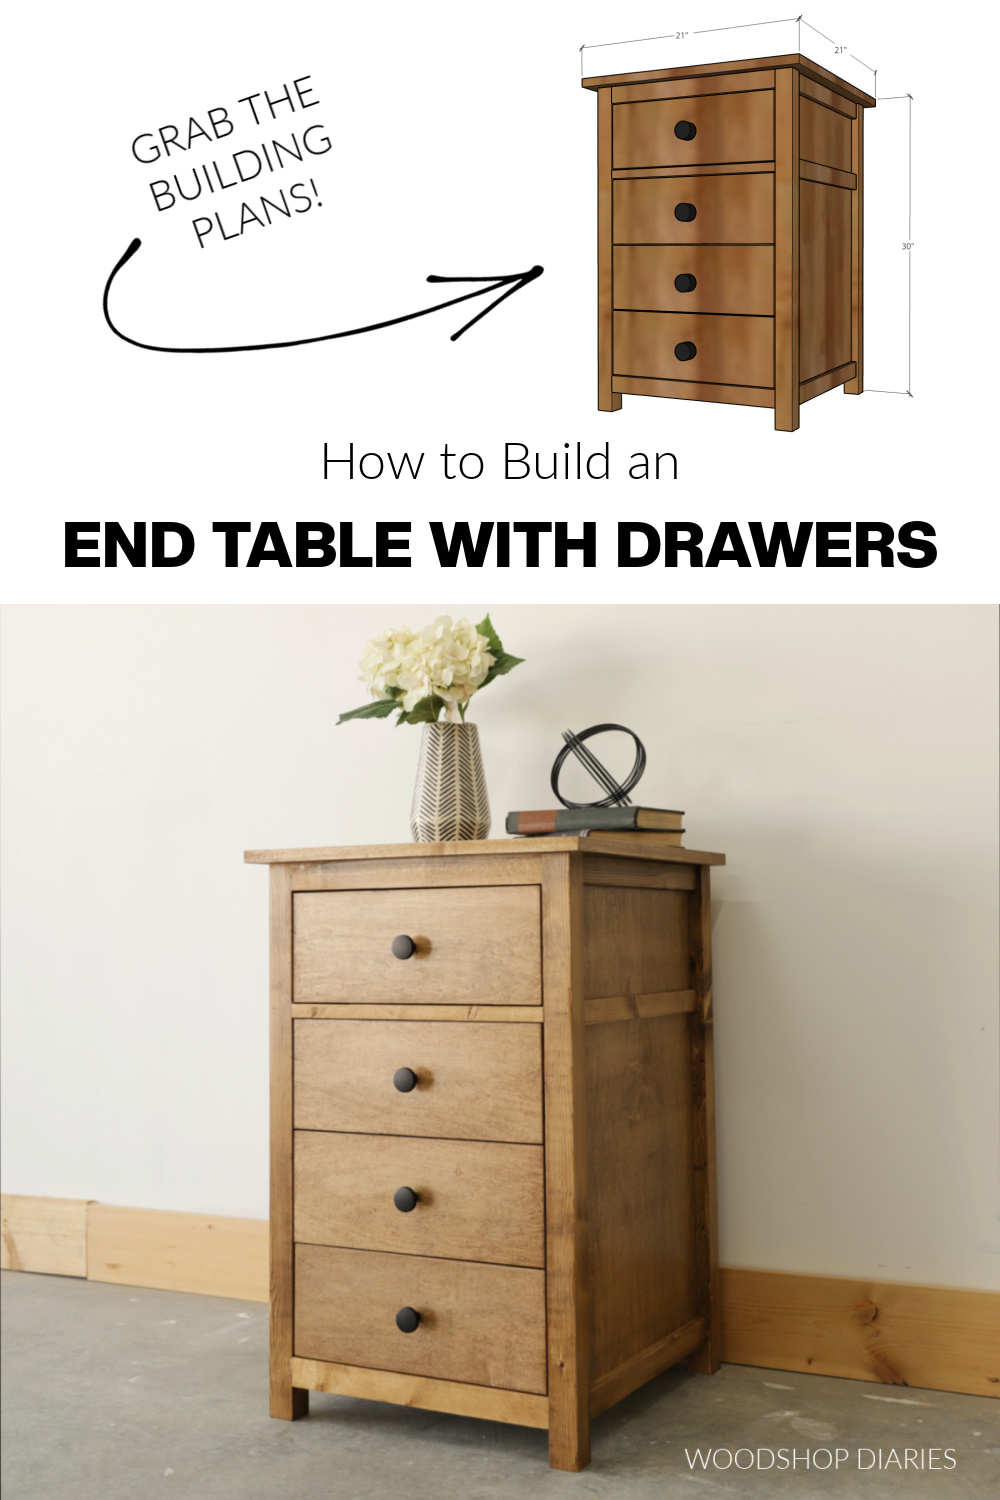 Pinterest collage image showing overall dimensional diagram of end table at top and completed build at bottom with text "how to build an end table with drawers"